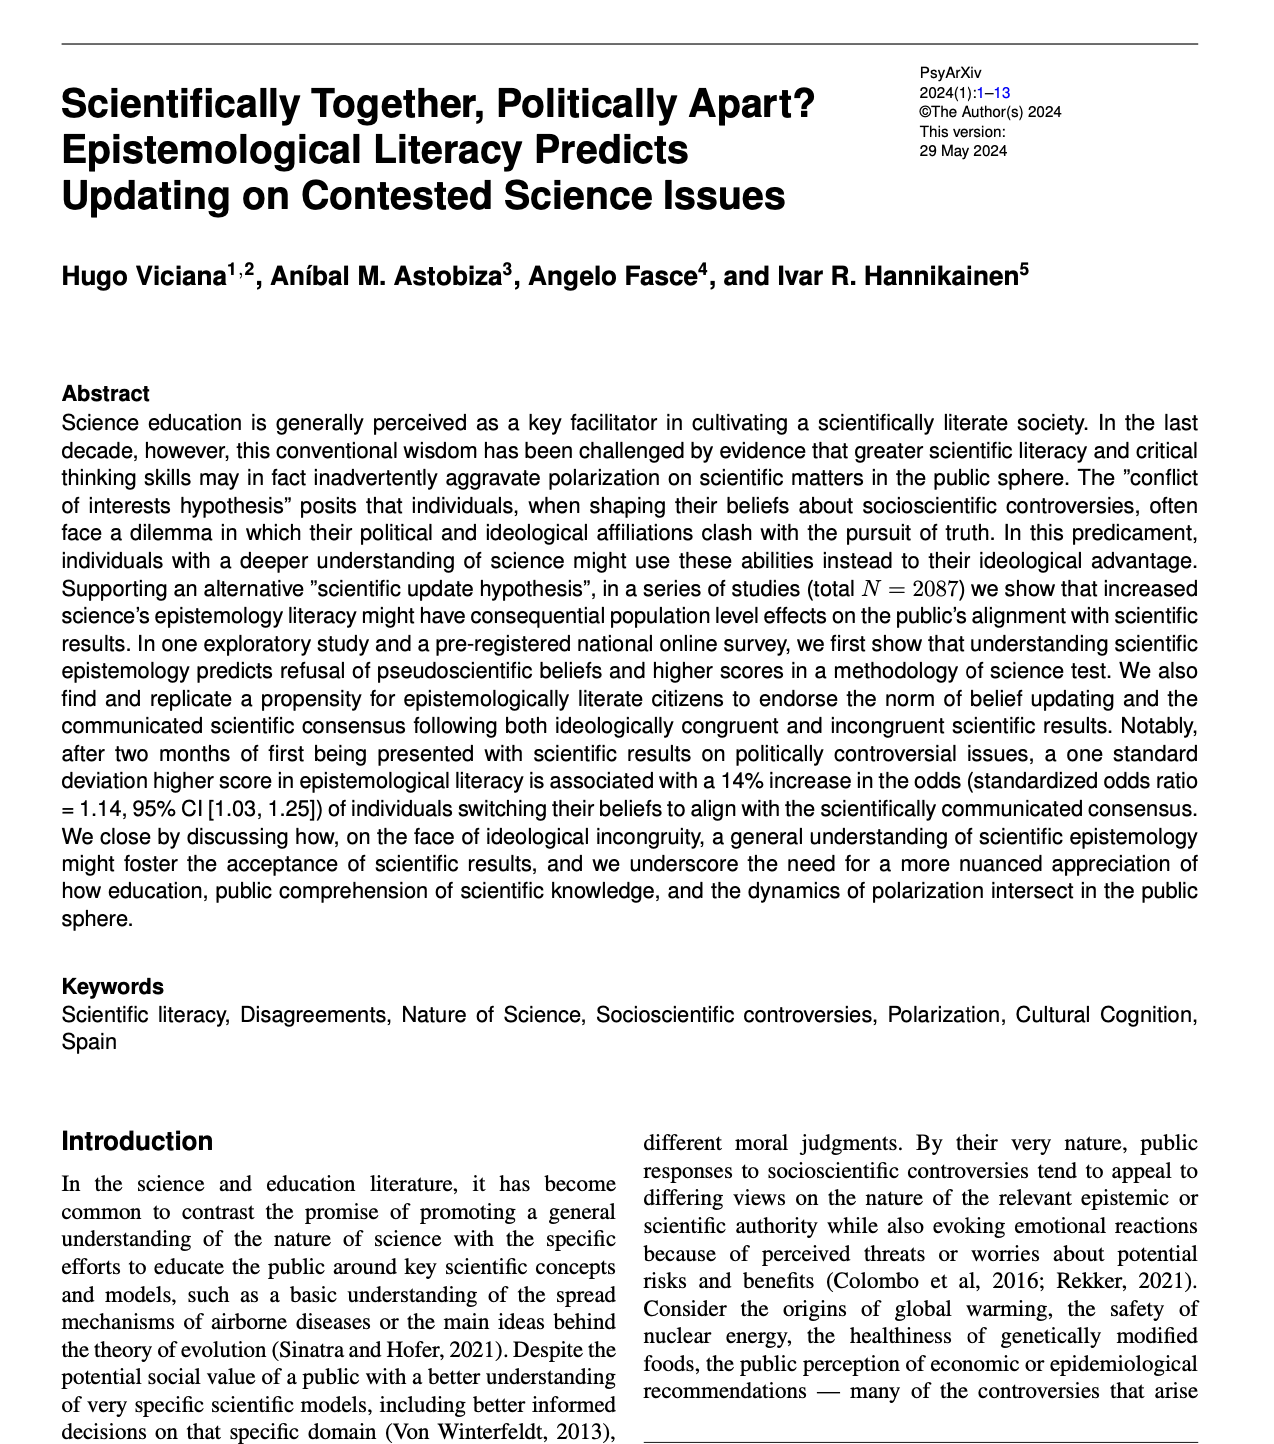 Scientifically together, politically apart? Epistemological literacy predicts updating on contested science issues